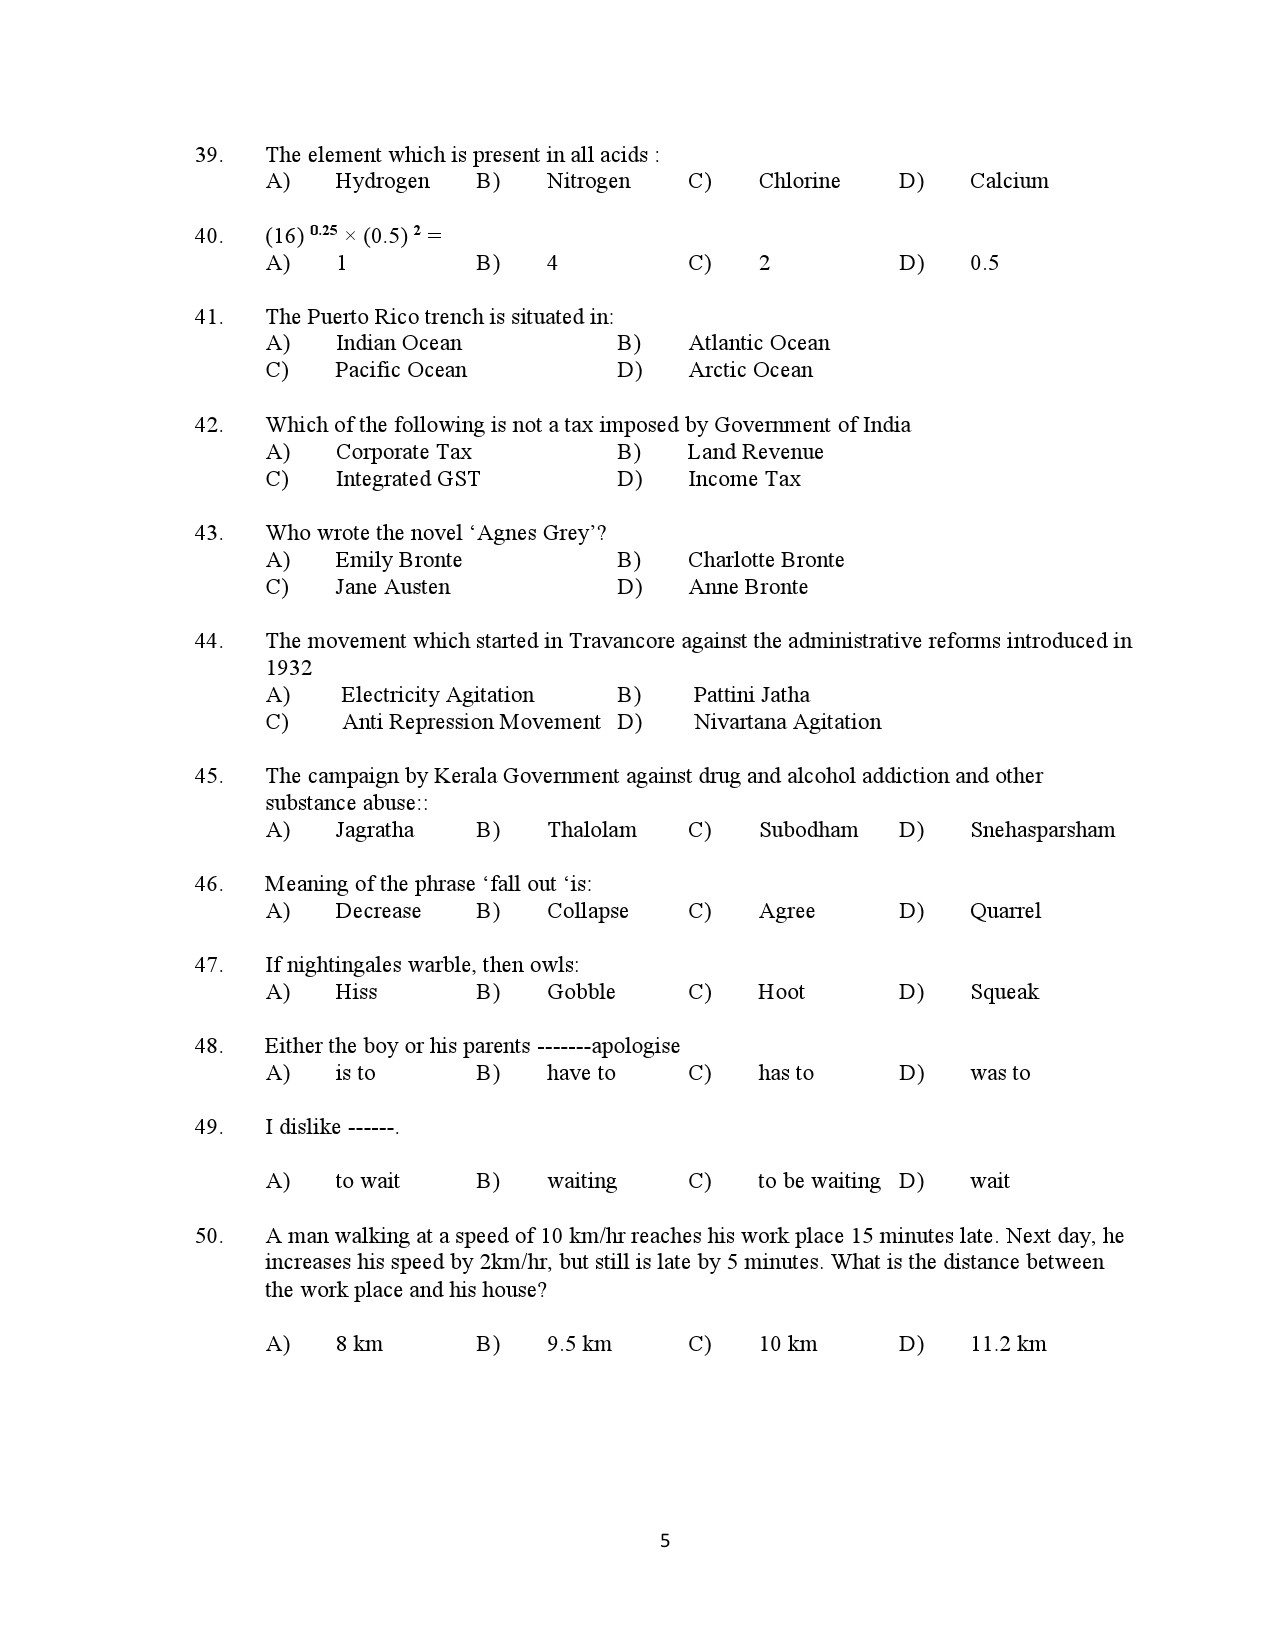 Kerala SET General Knowledge Exam Question Paper July 2021 5